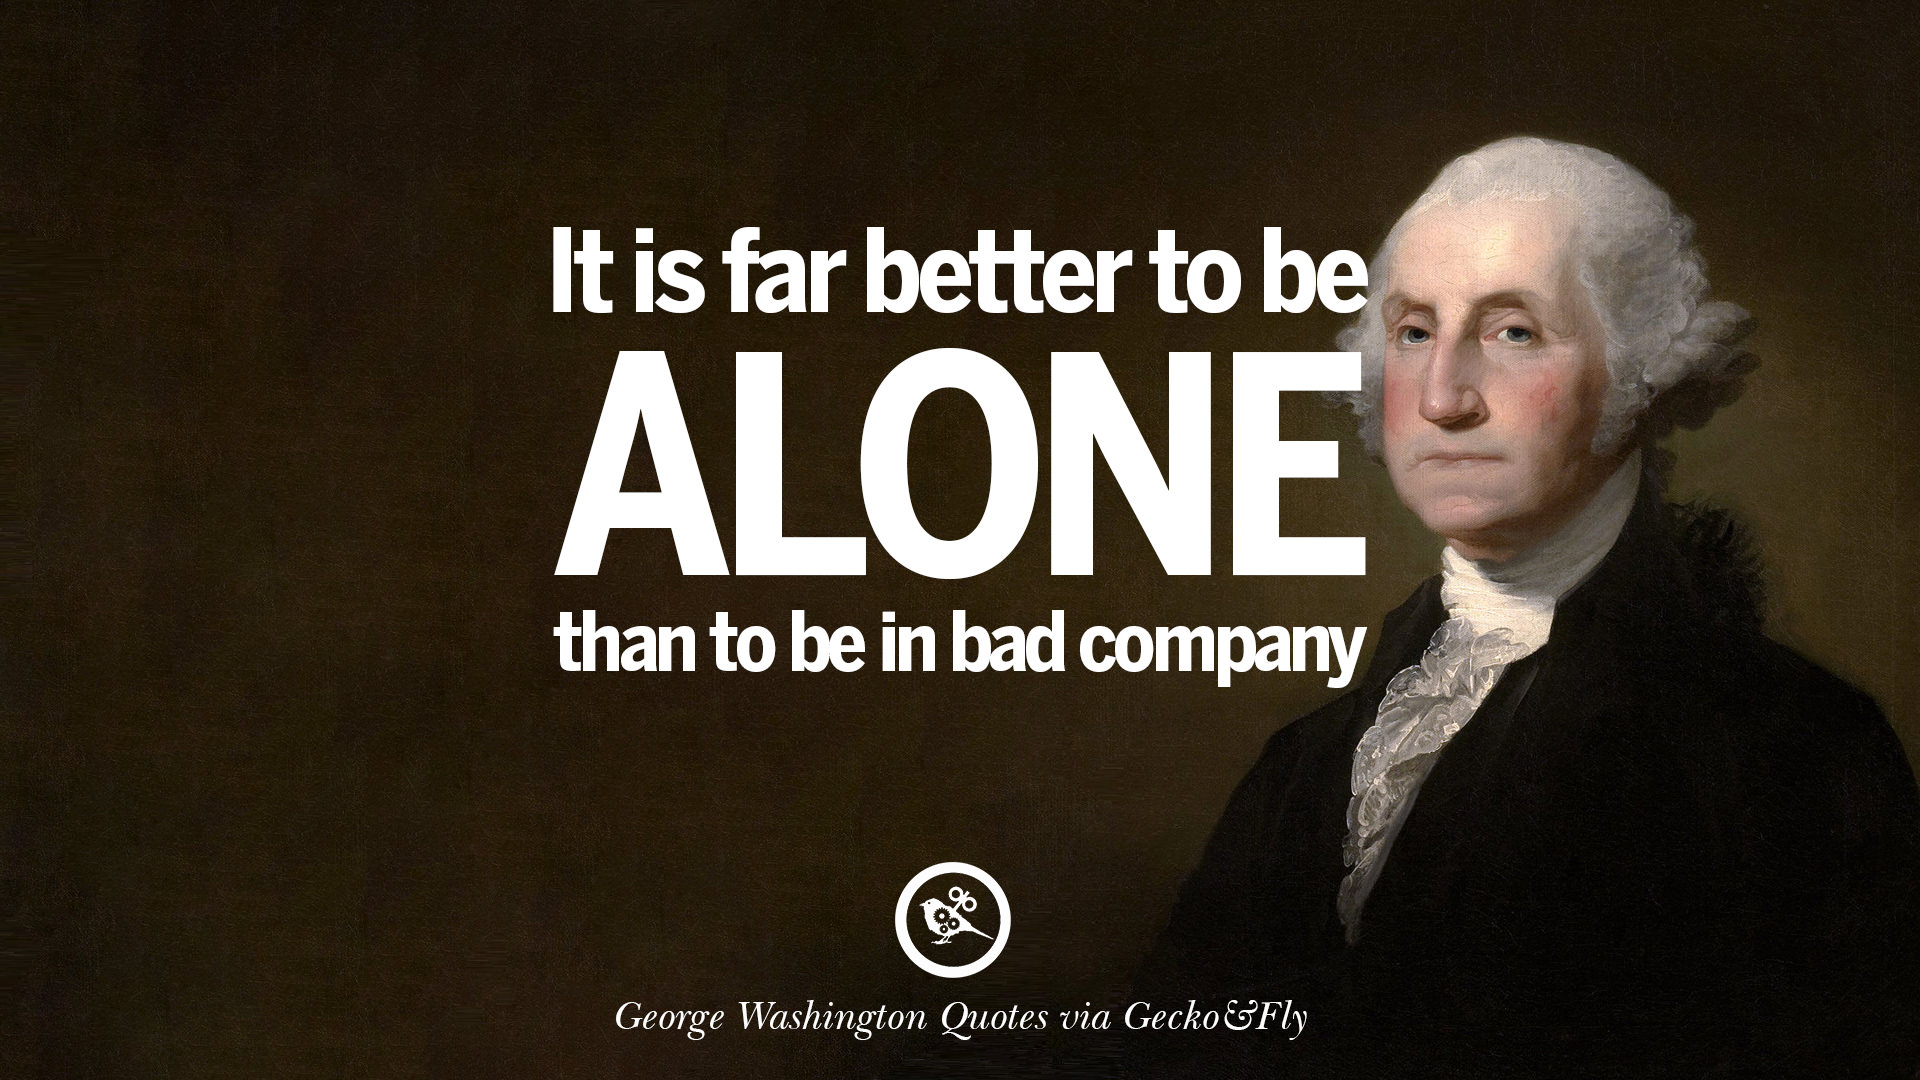 it is far better to be alone than to be in bad company. george washington